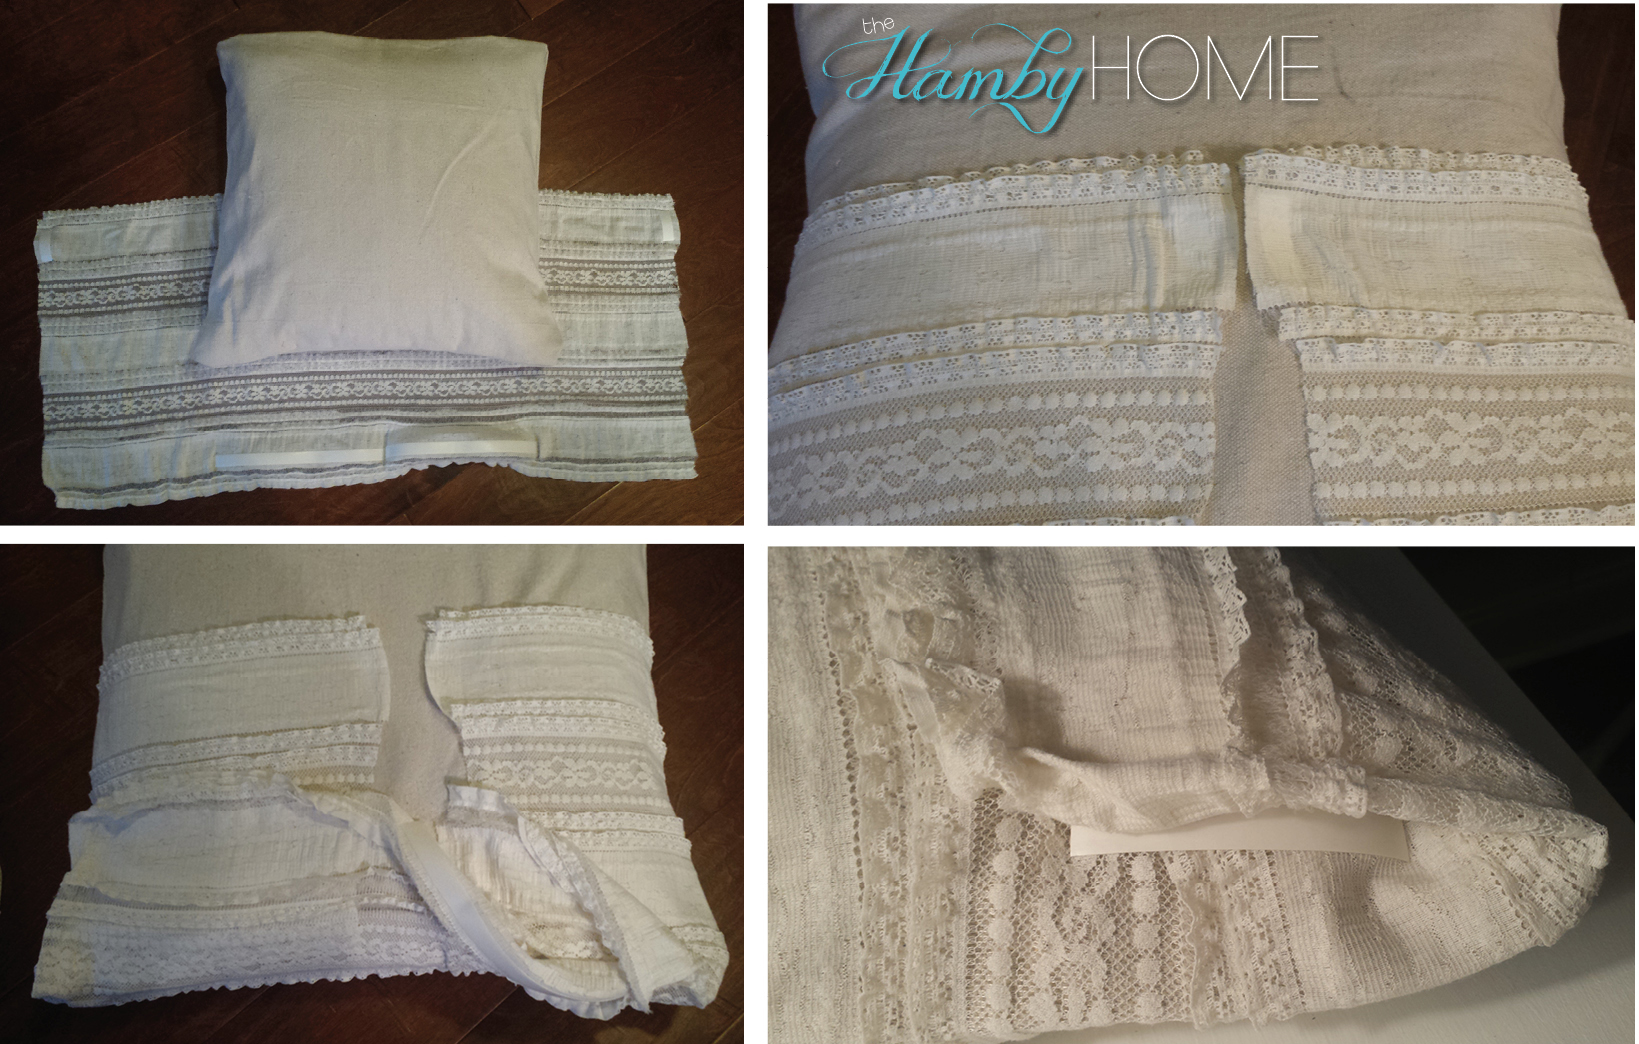 Diy No Sew Dropcloth Lace Pillow Covers The Hamby Home